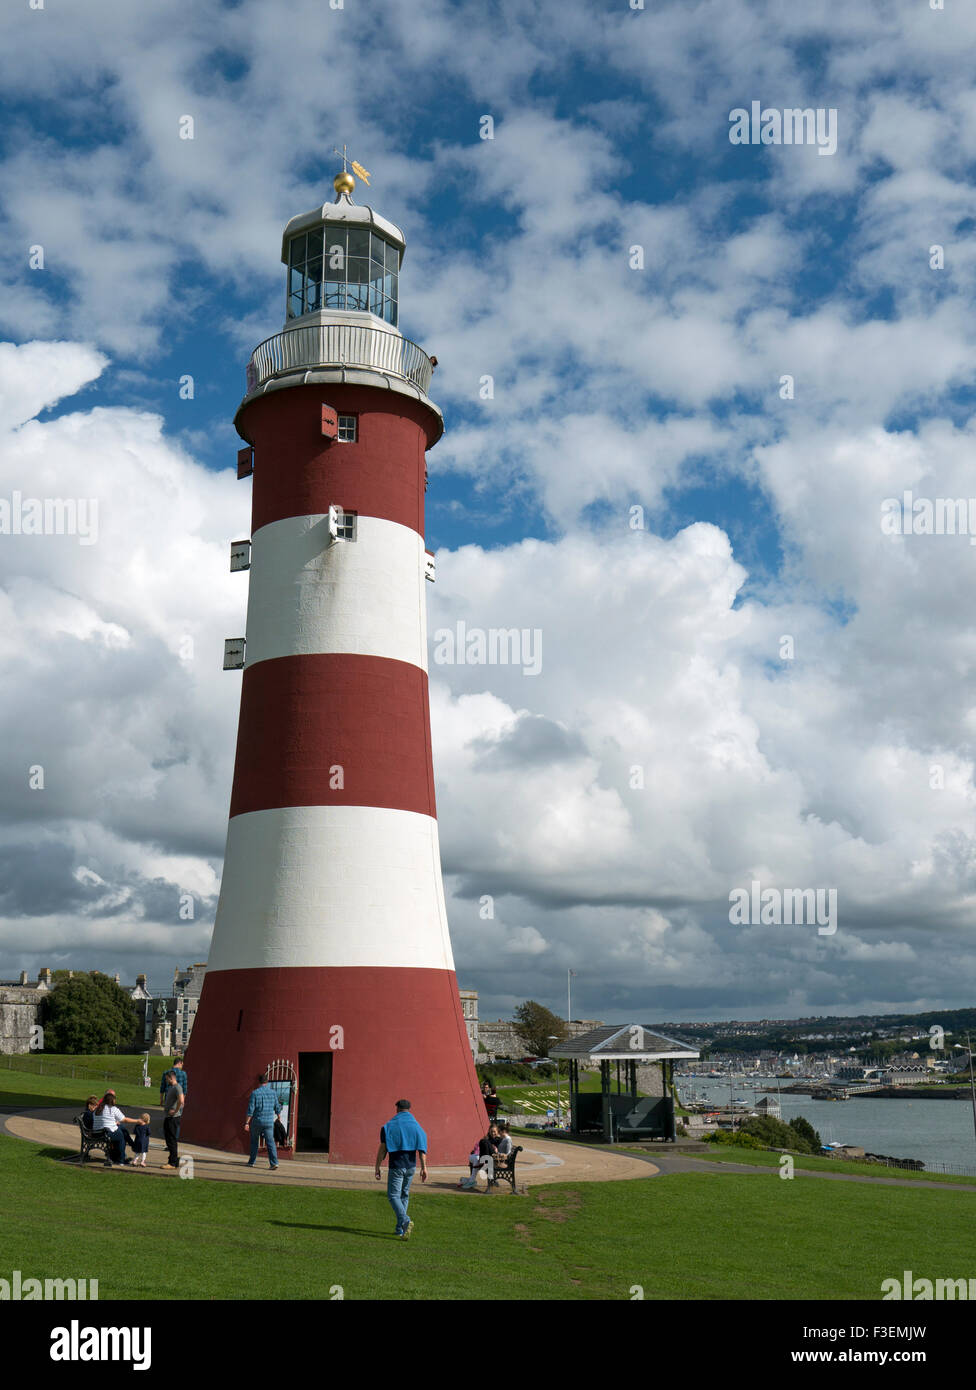 Smeaton's Tower lighthouse à Plymouth, Devon, Angleterre. Banque D'Images